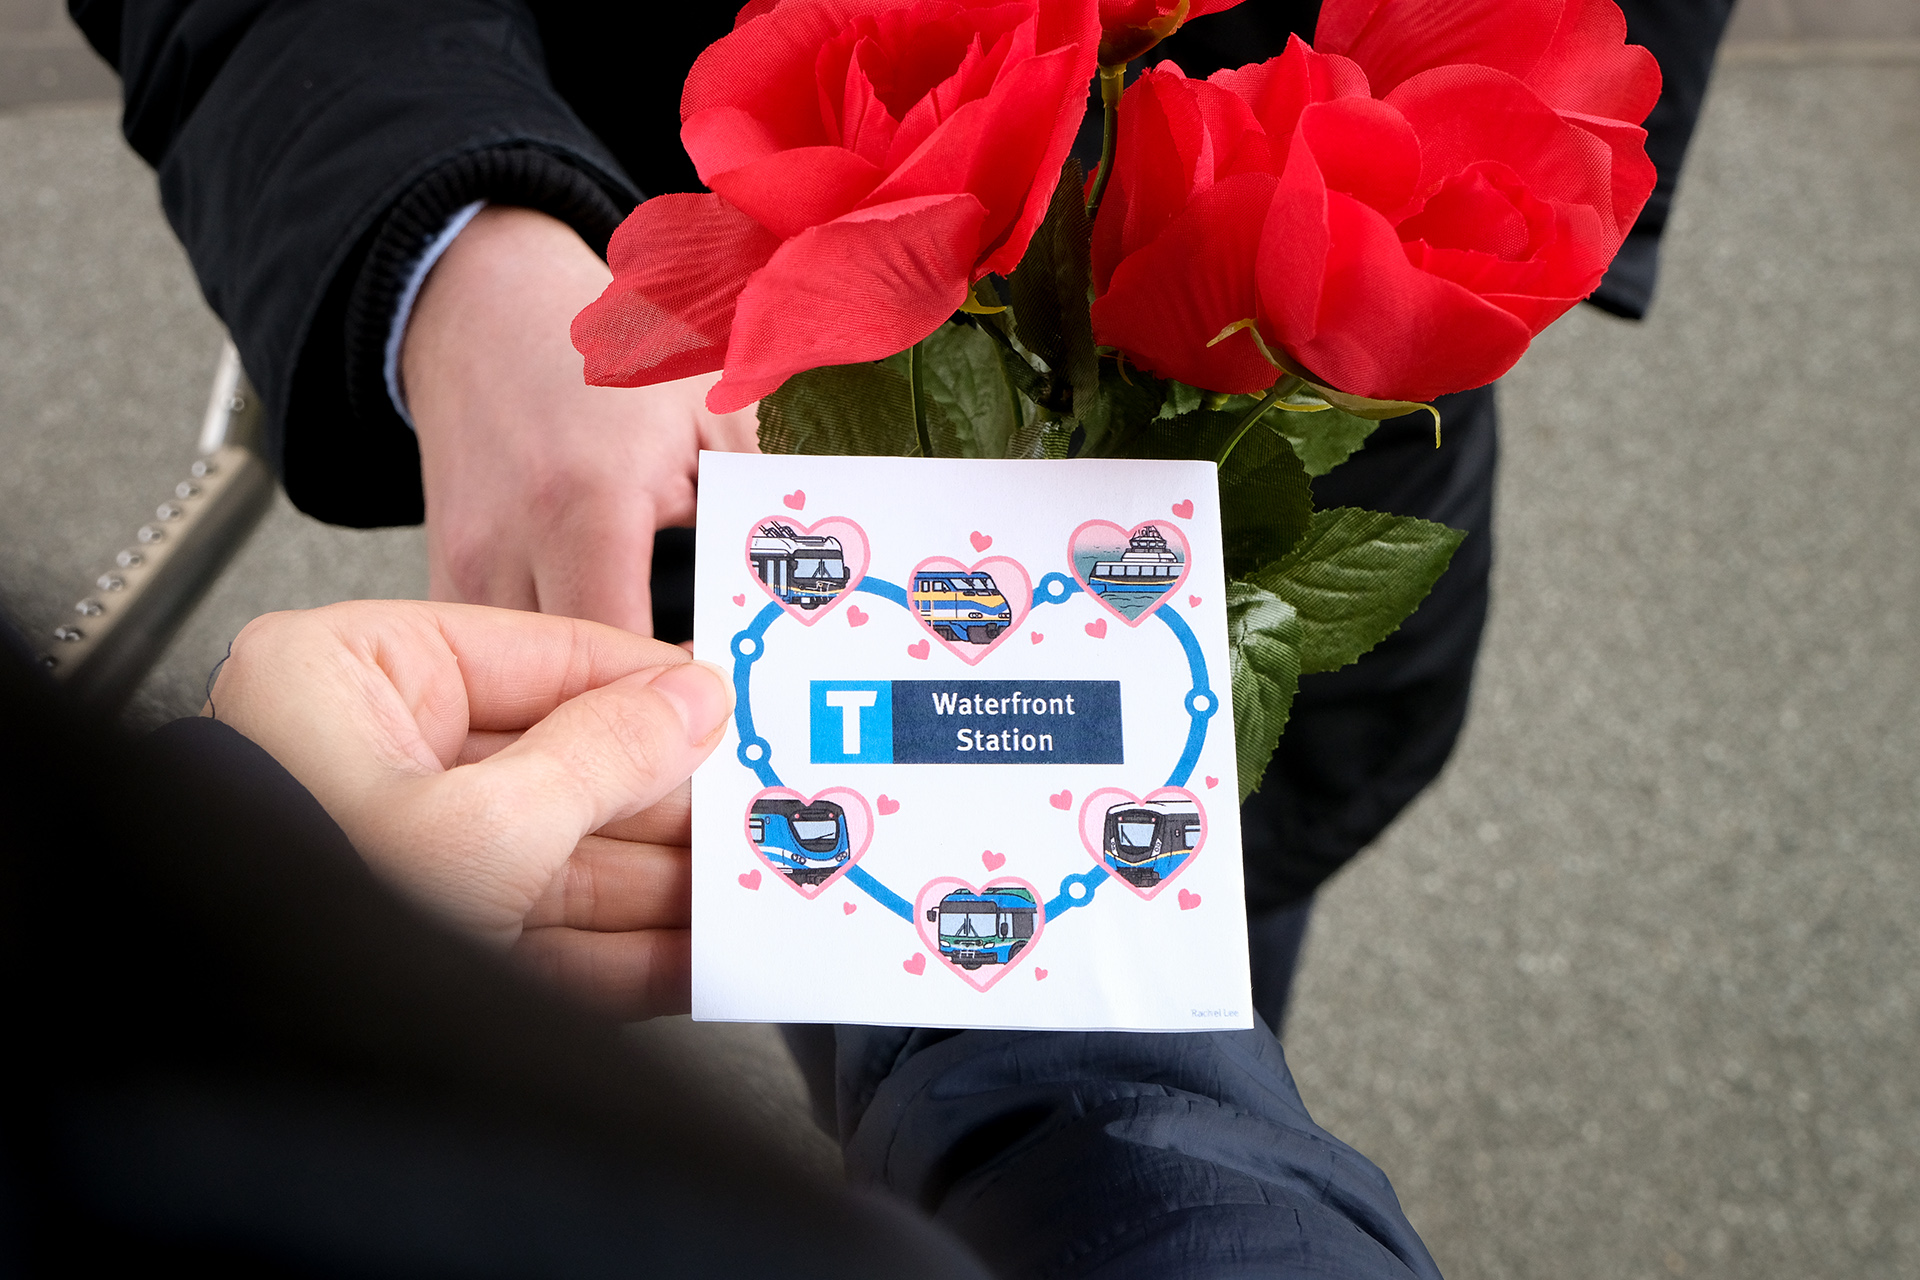 Person hands TransLink Valentines Day Card to someone